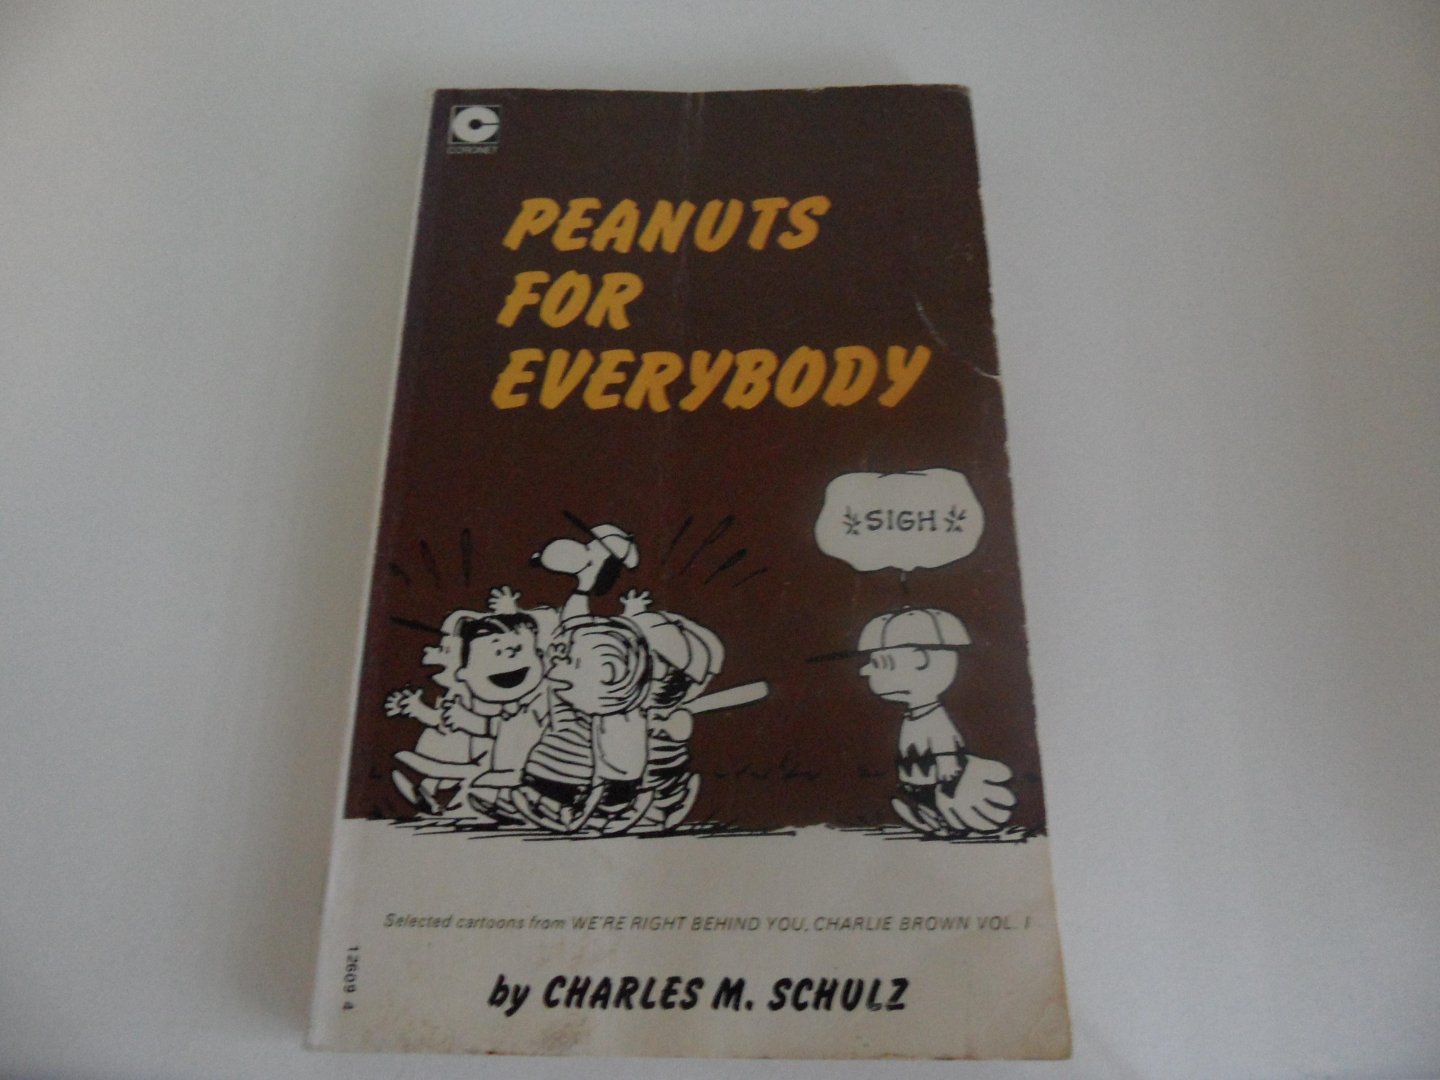 Schulz, Charles M. - Peanuts for everybody